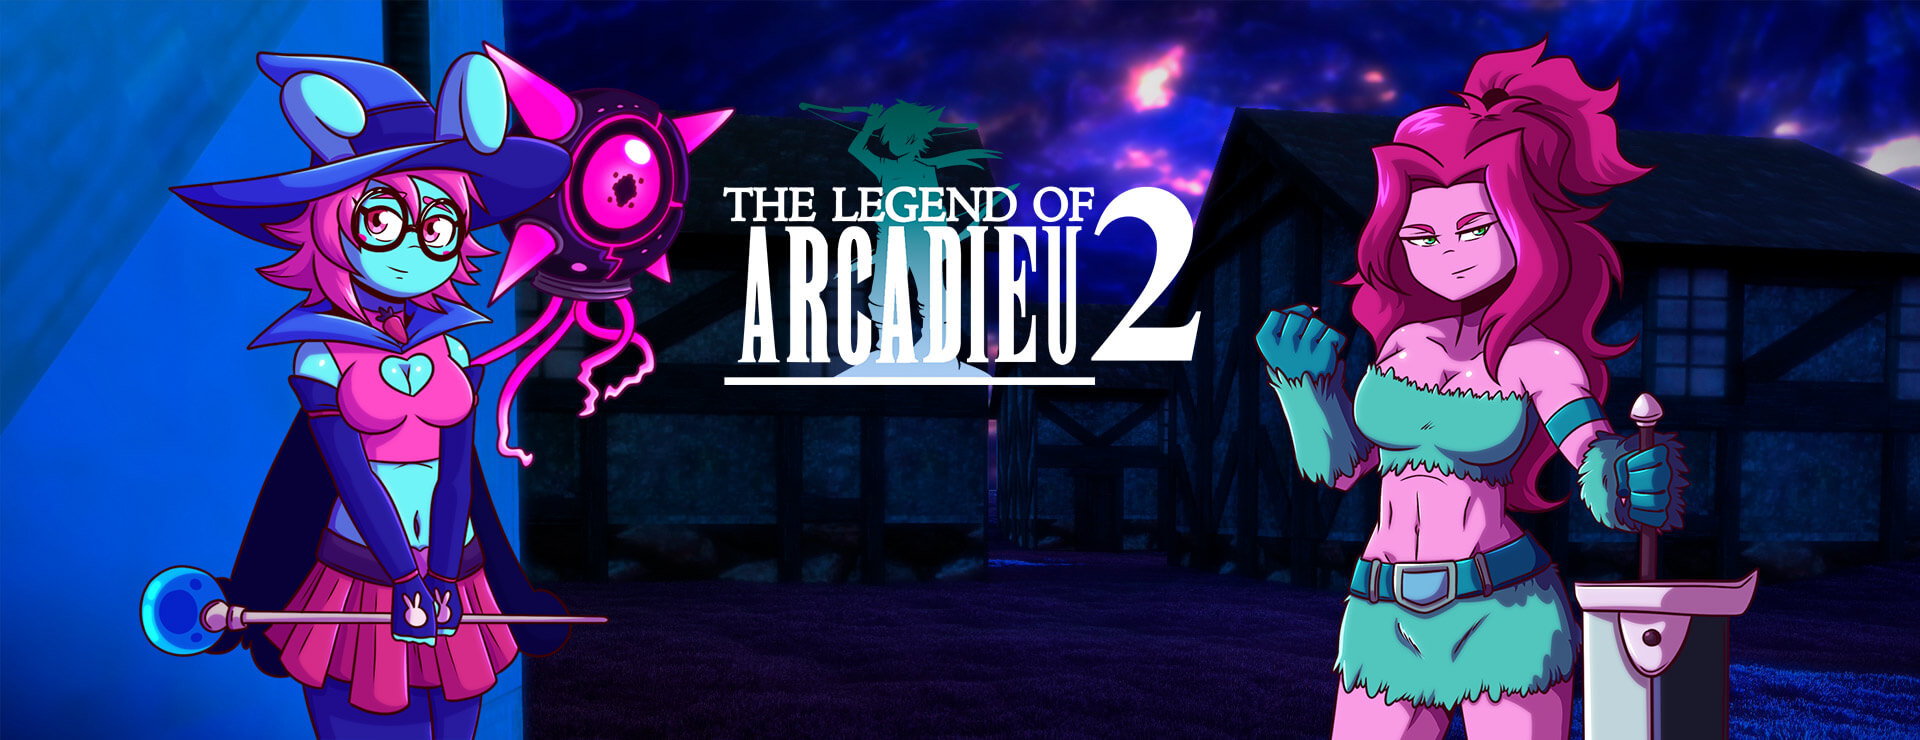 The Legend of Arcadieu 2 - RPG Game